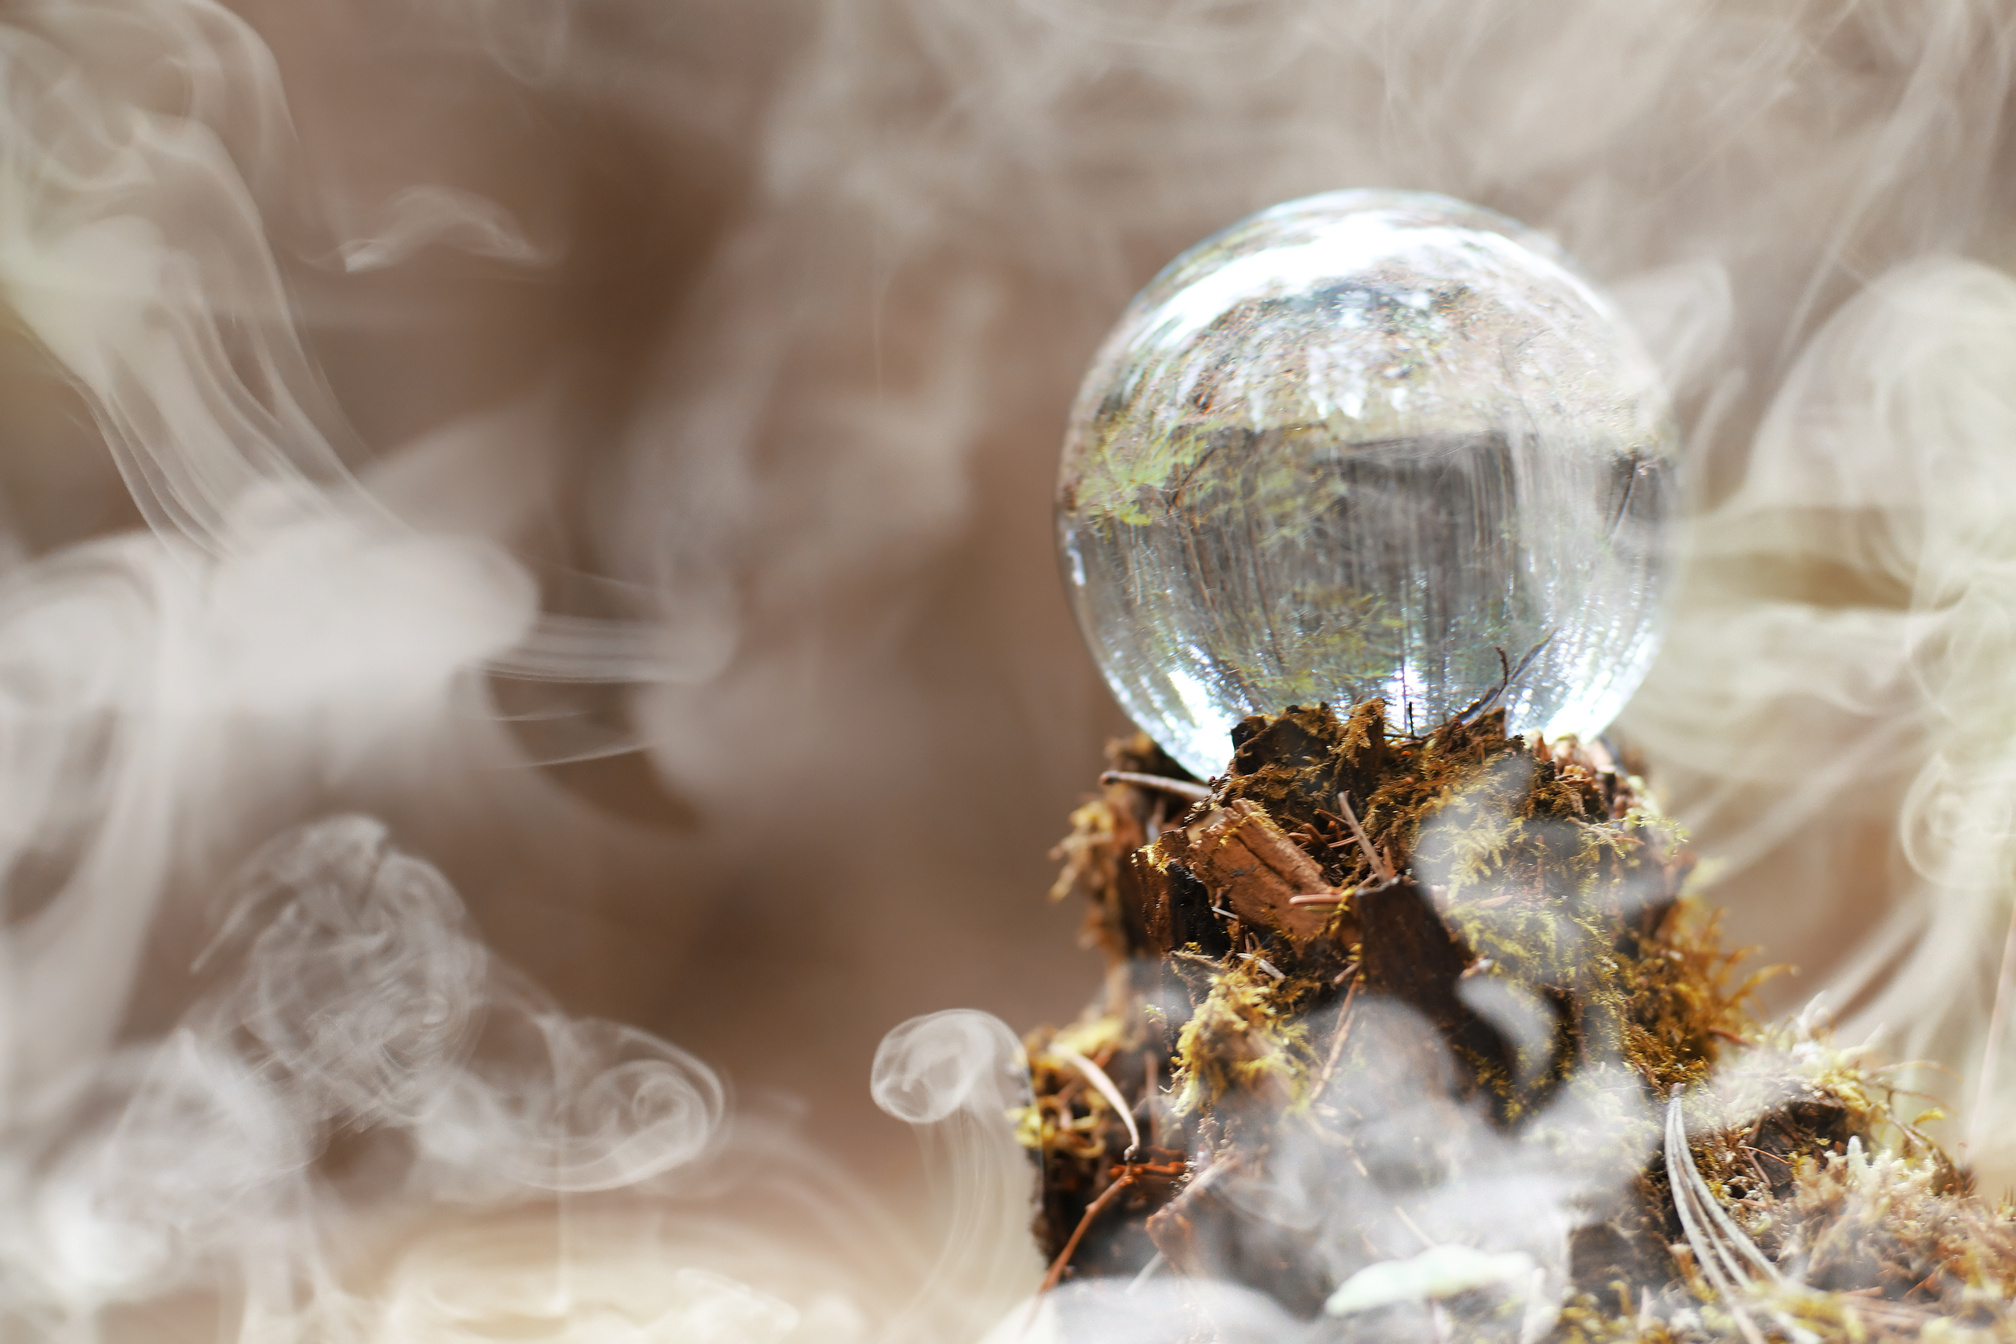 A Crystal Ball in the Smoke